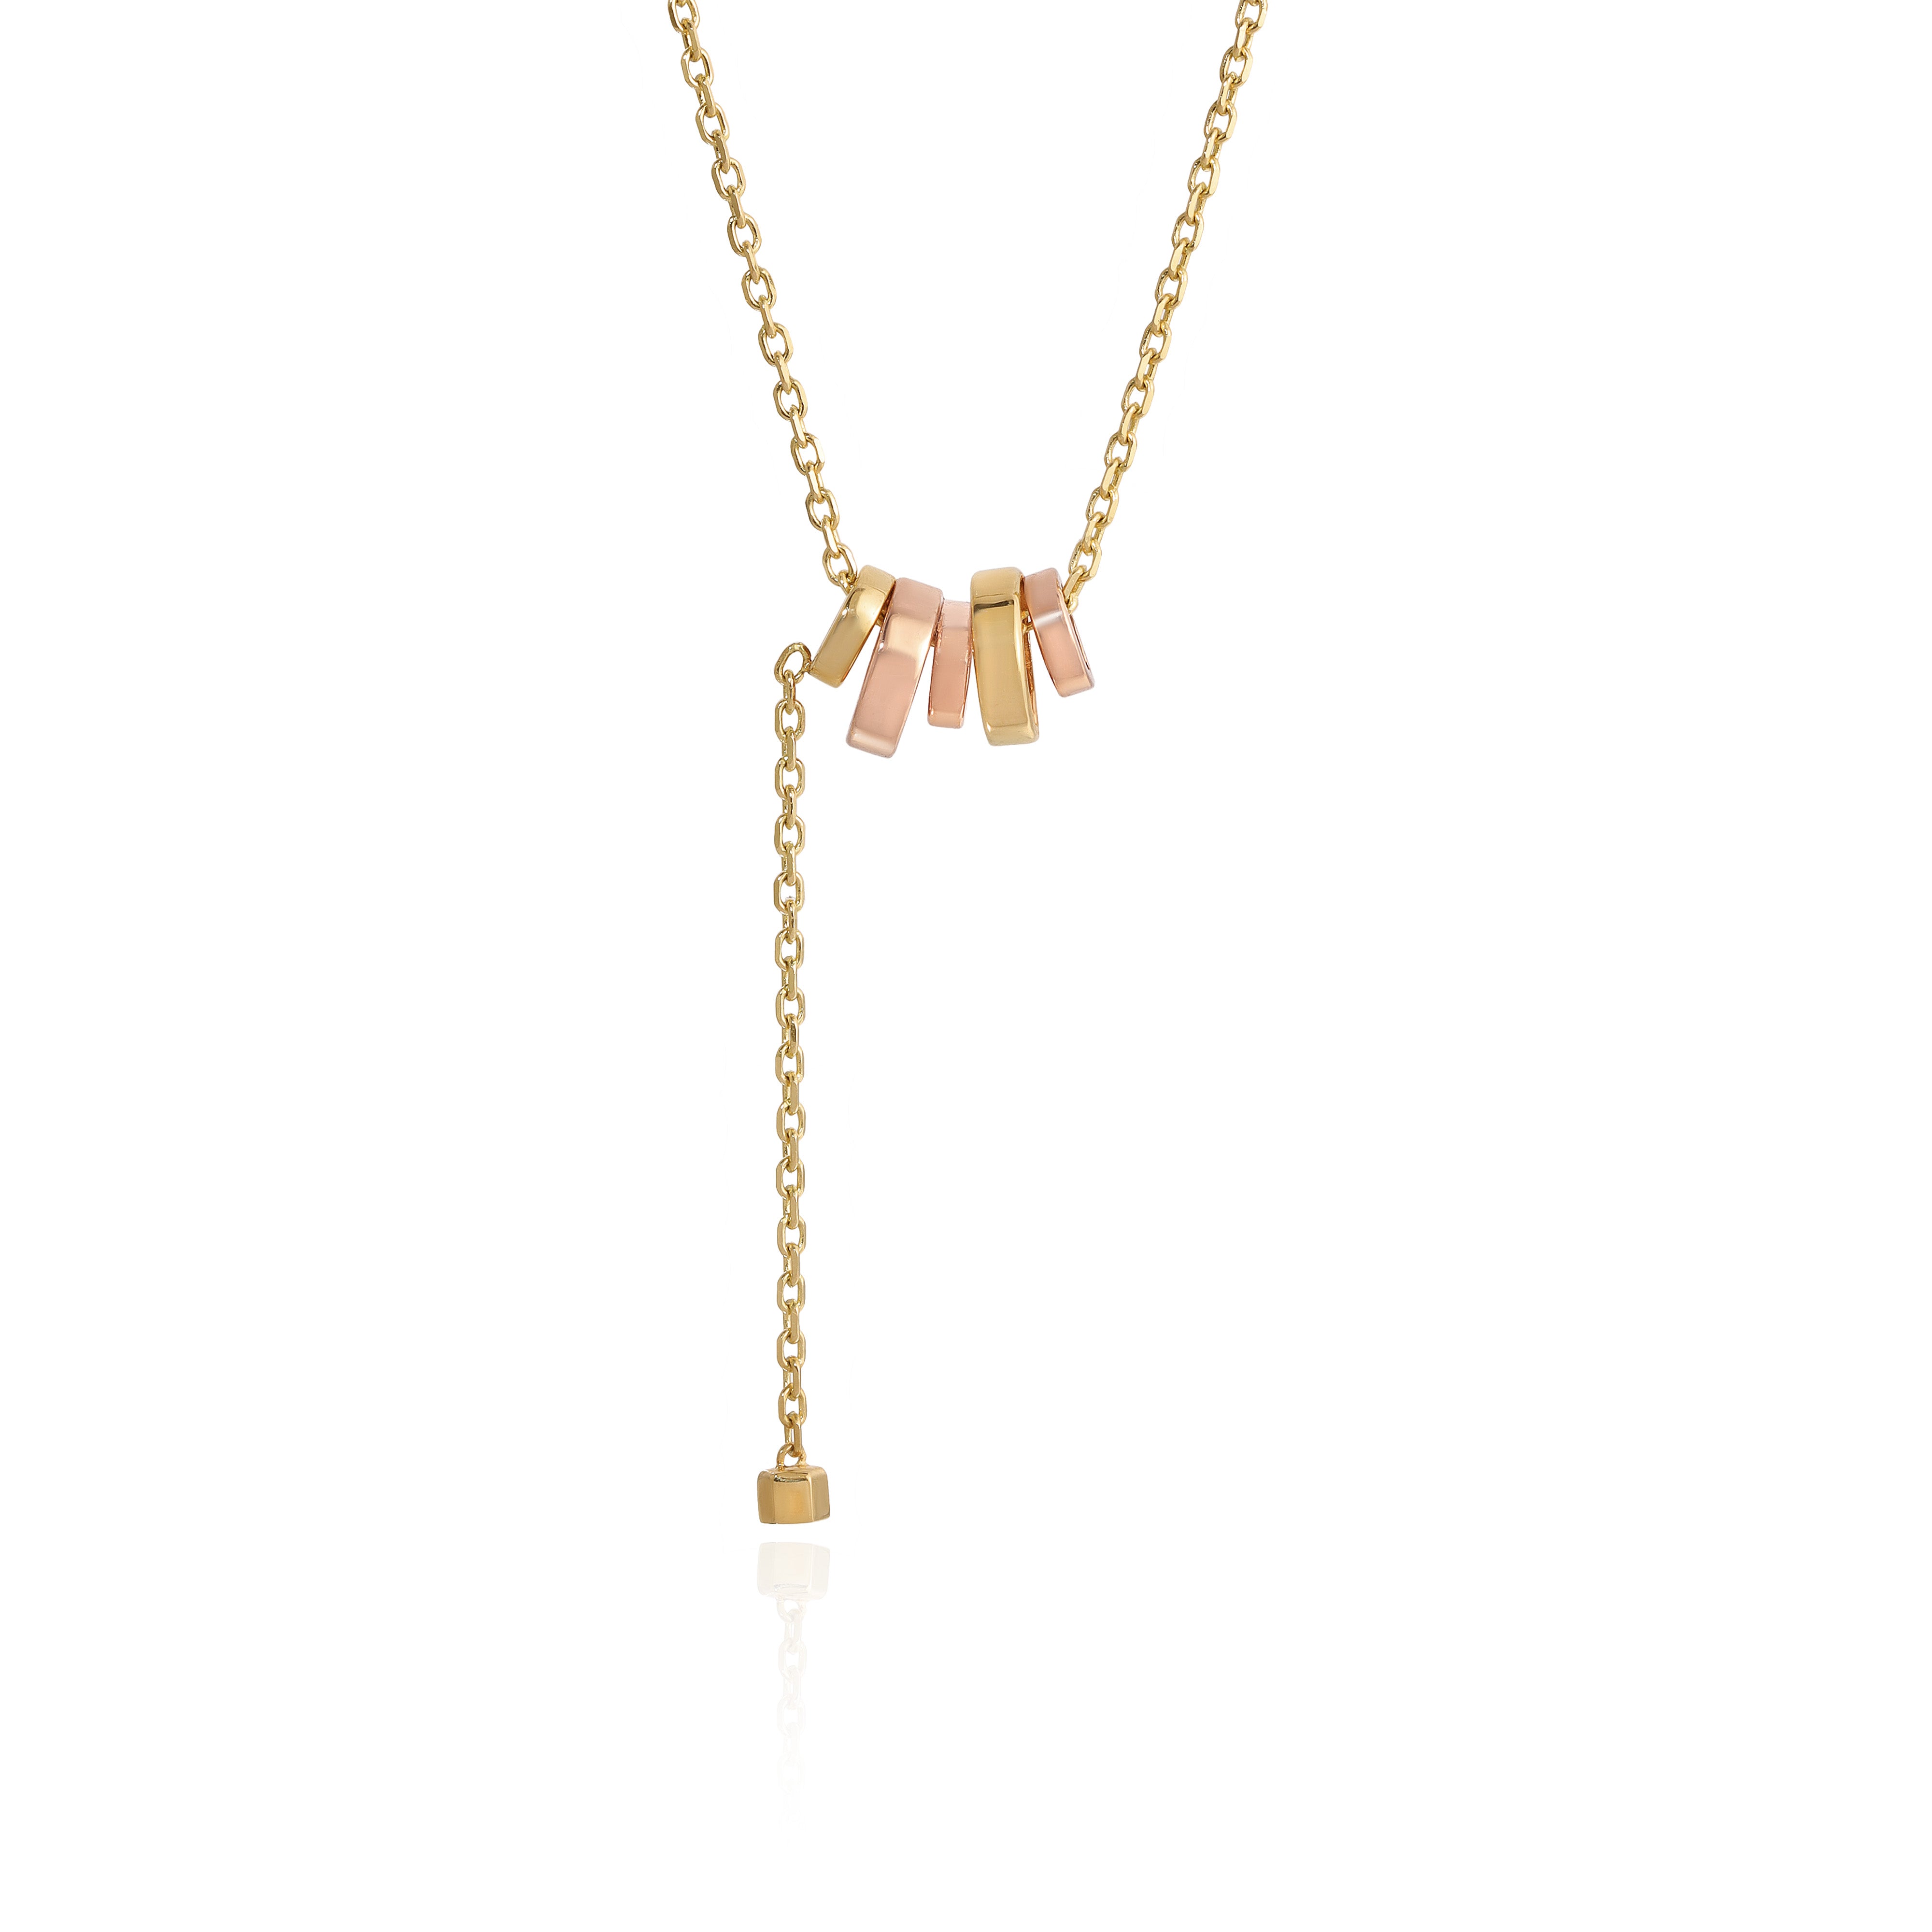 Yellow Gold Necklace with alternating Yellow and Rose Gold discs and hanging chain, Small